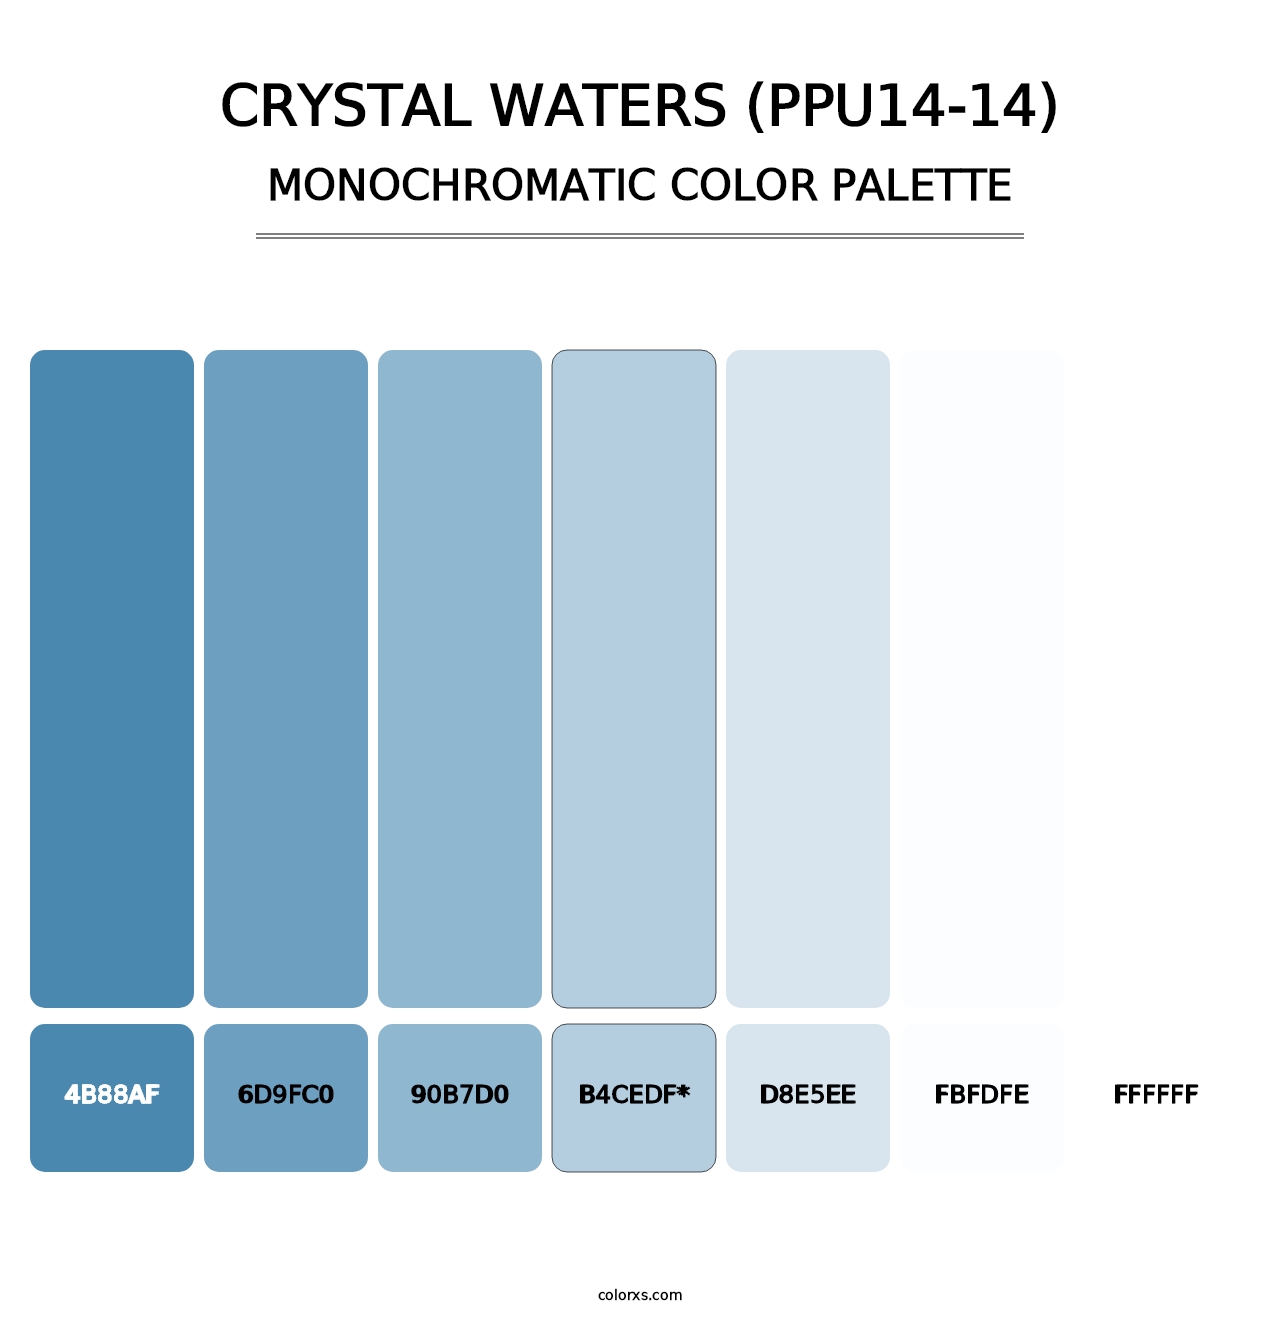 Crystal Waters (PPU14-14) - Monochromatic Color Palette